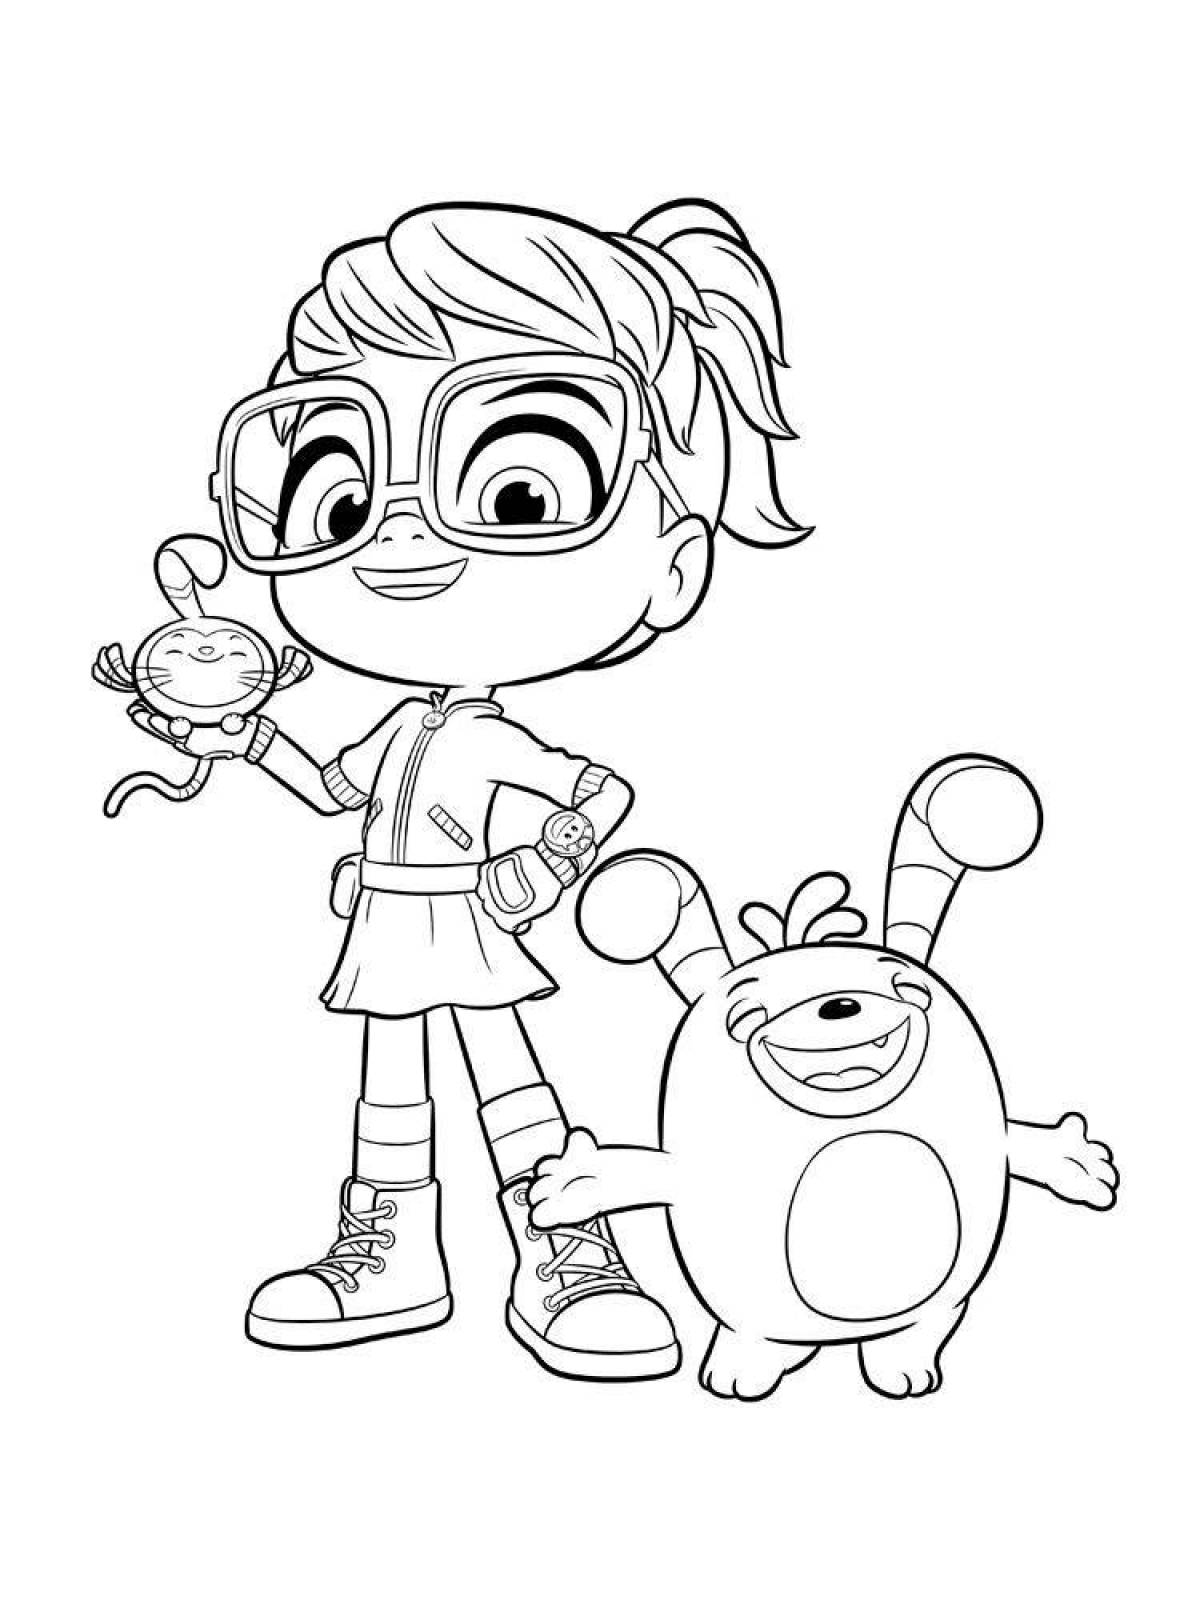 Poppy playtime coloring page